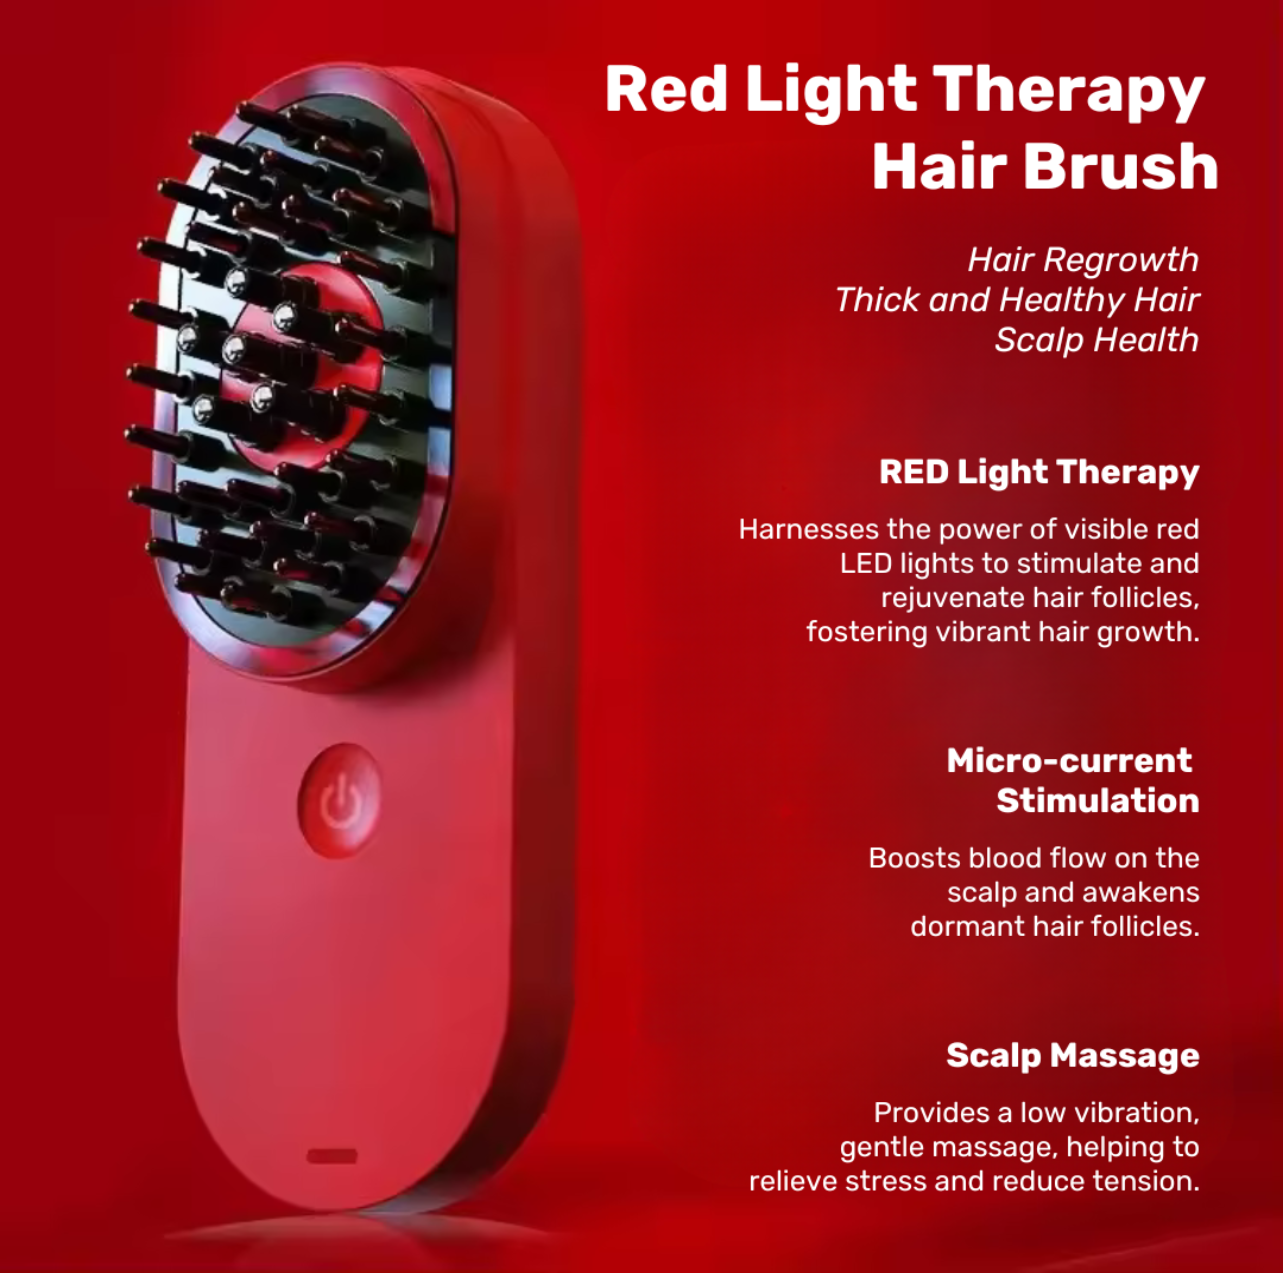 Red Light Therapy Hair Brush